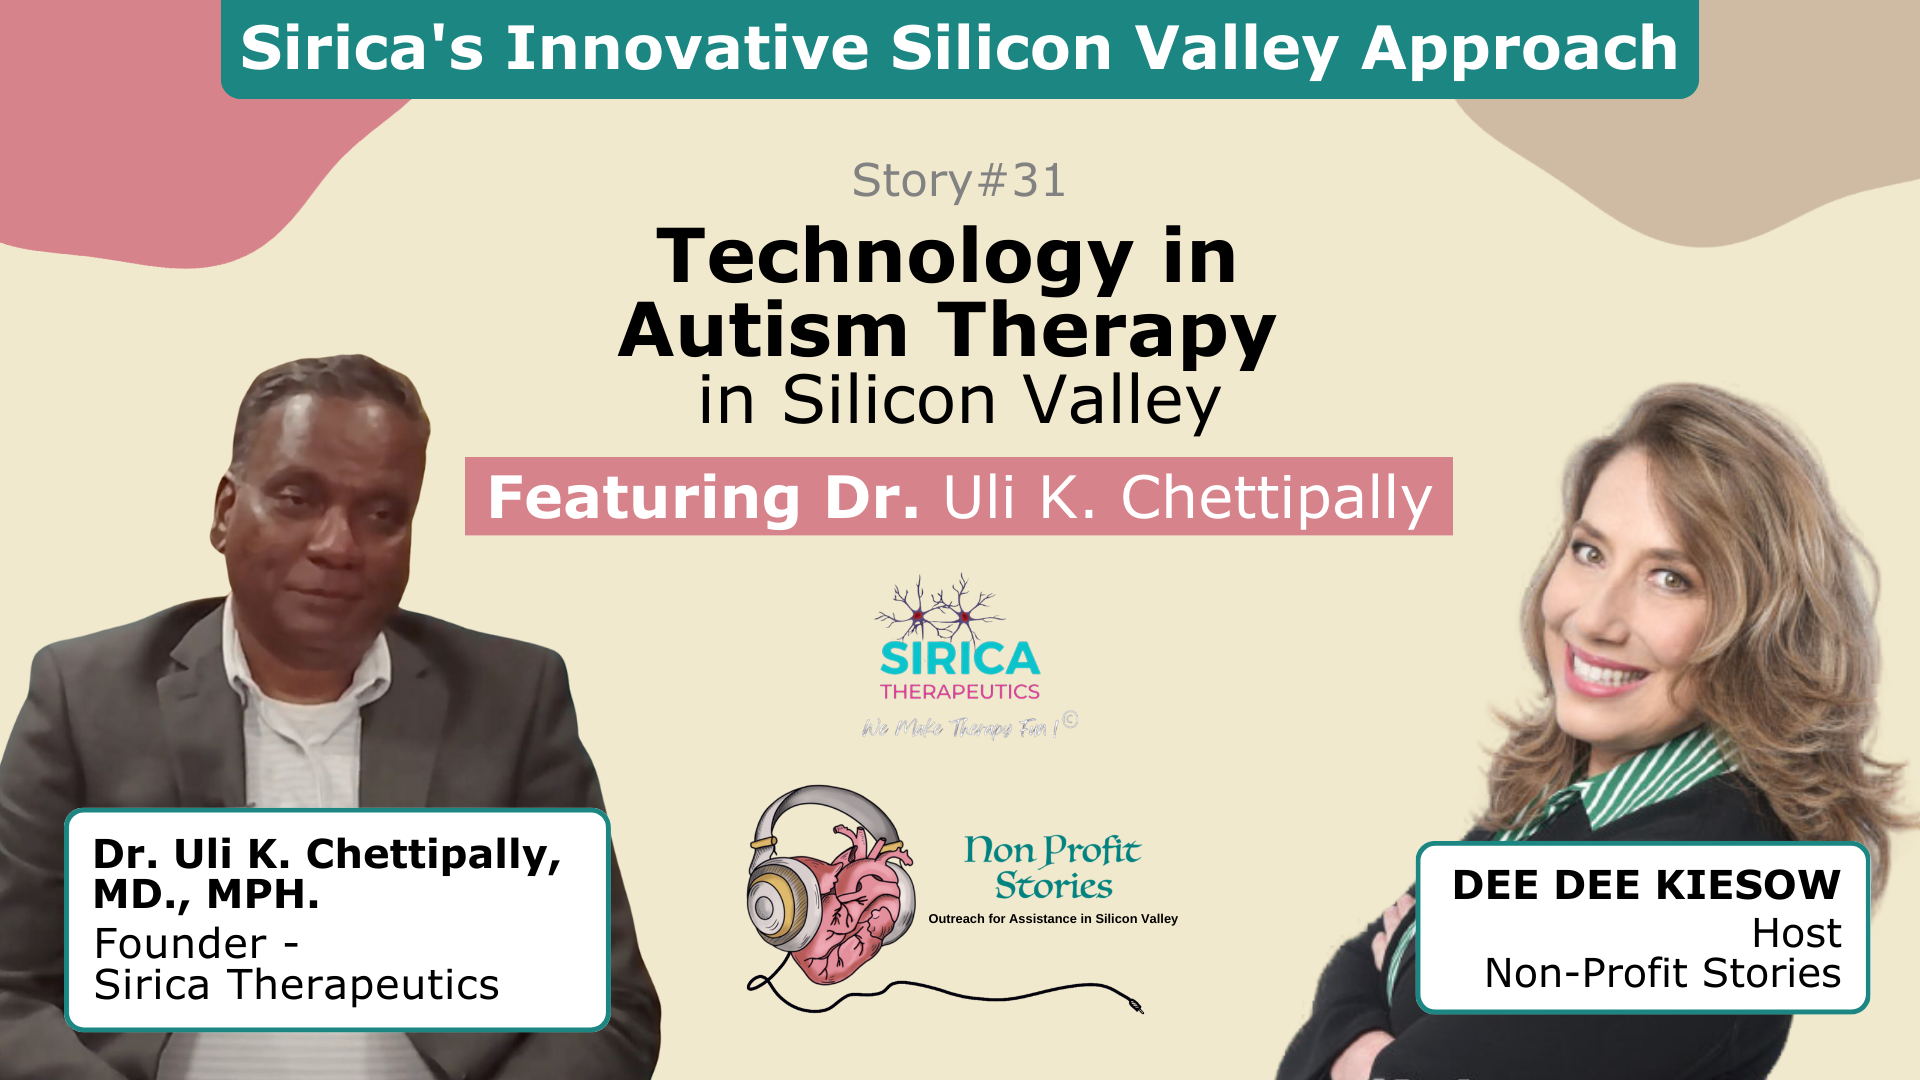 Technology in Autism Therapy: Sirica’s Innovative Silicon Valley Approach